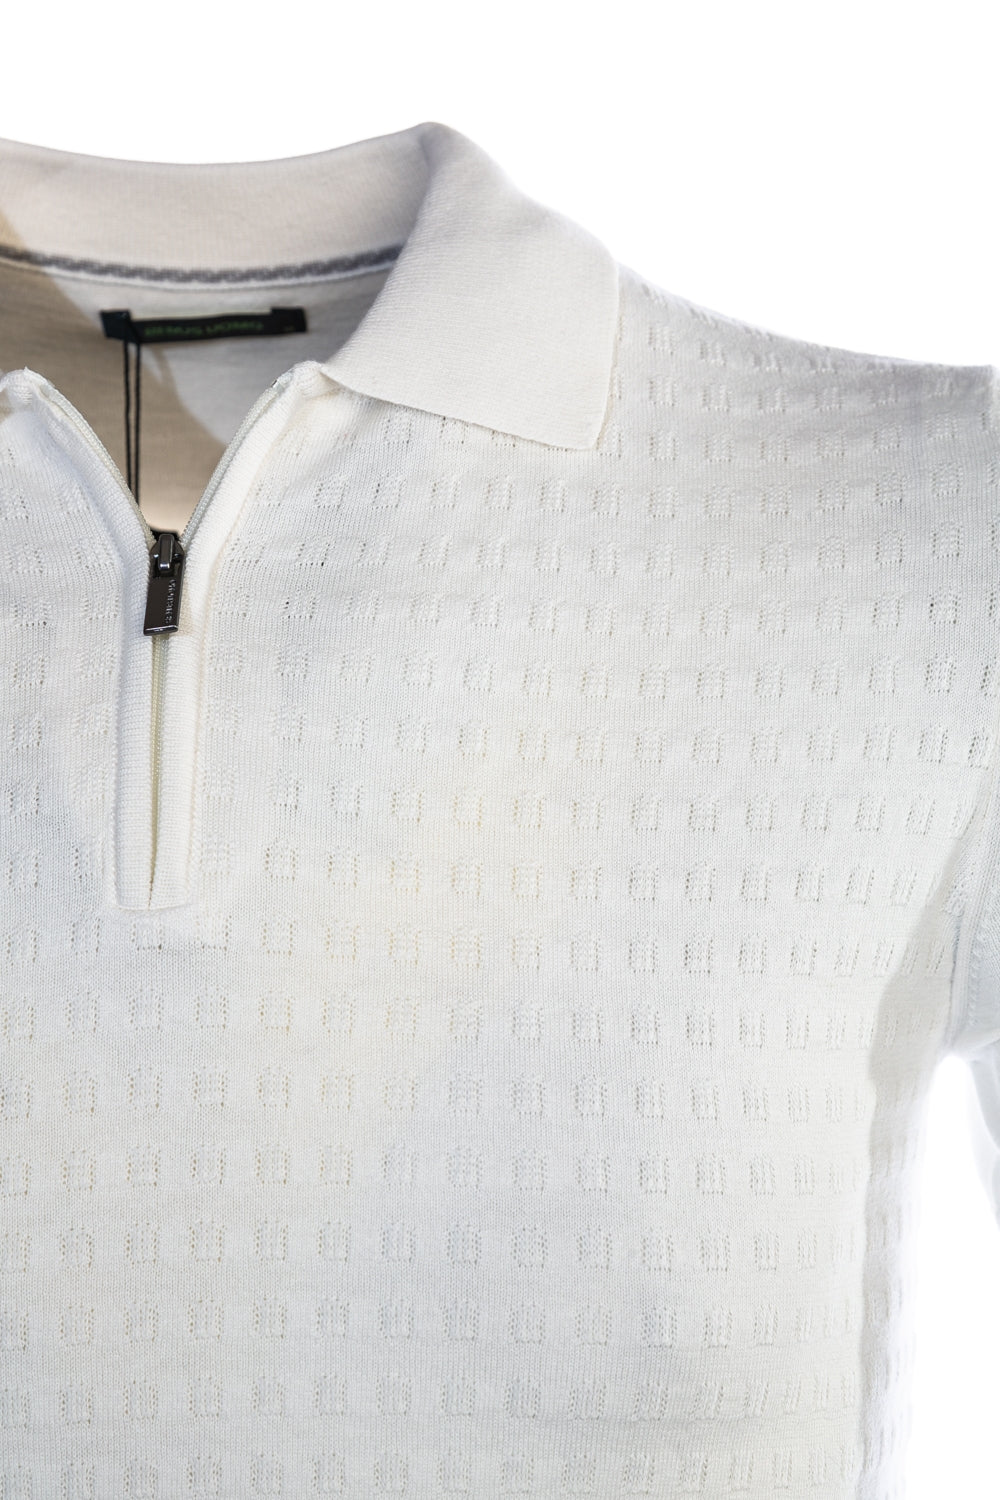 Remus Uomo Knitted Zip Polo Shirt in Off White